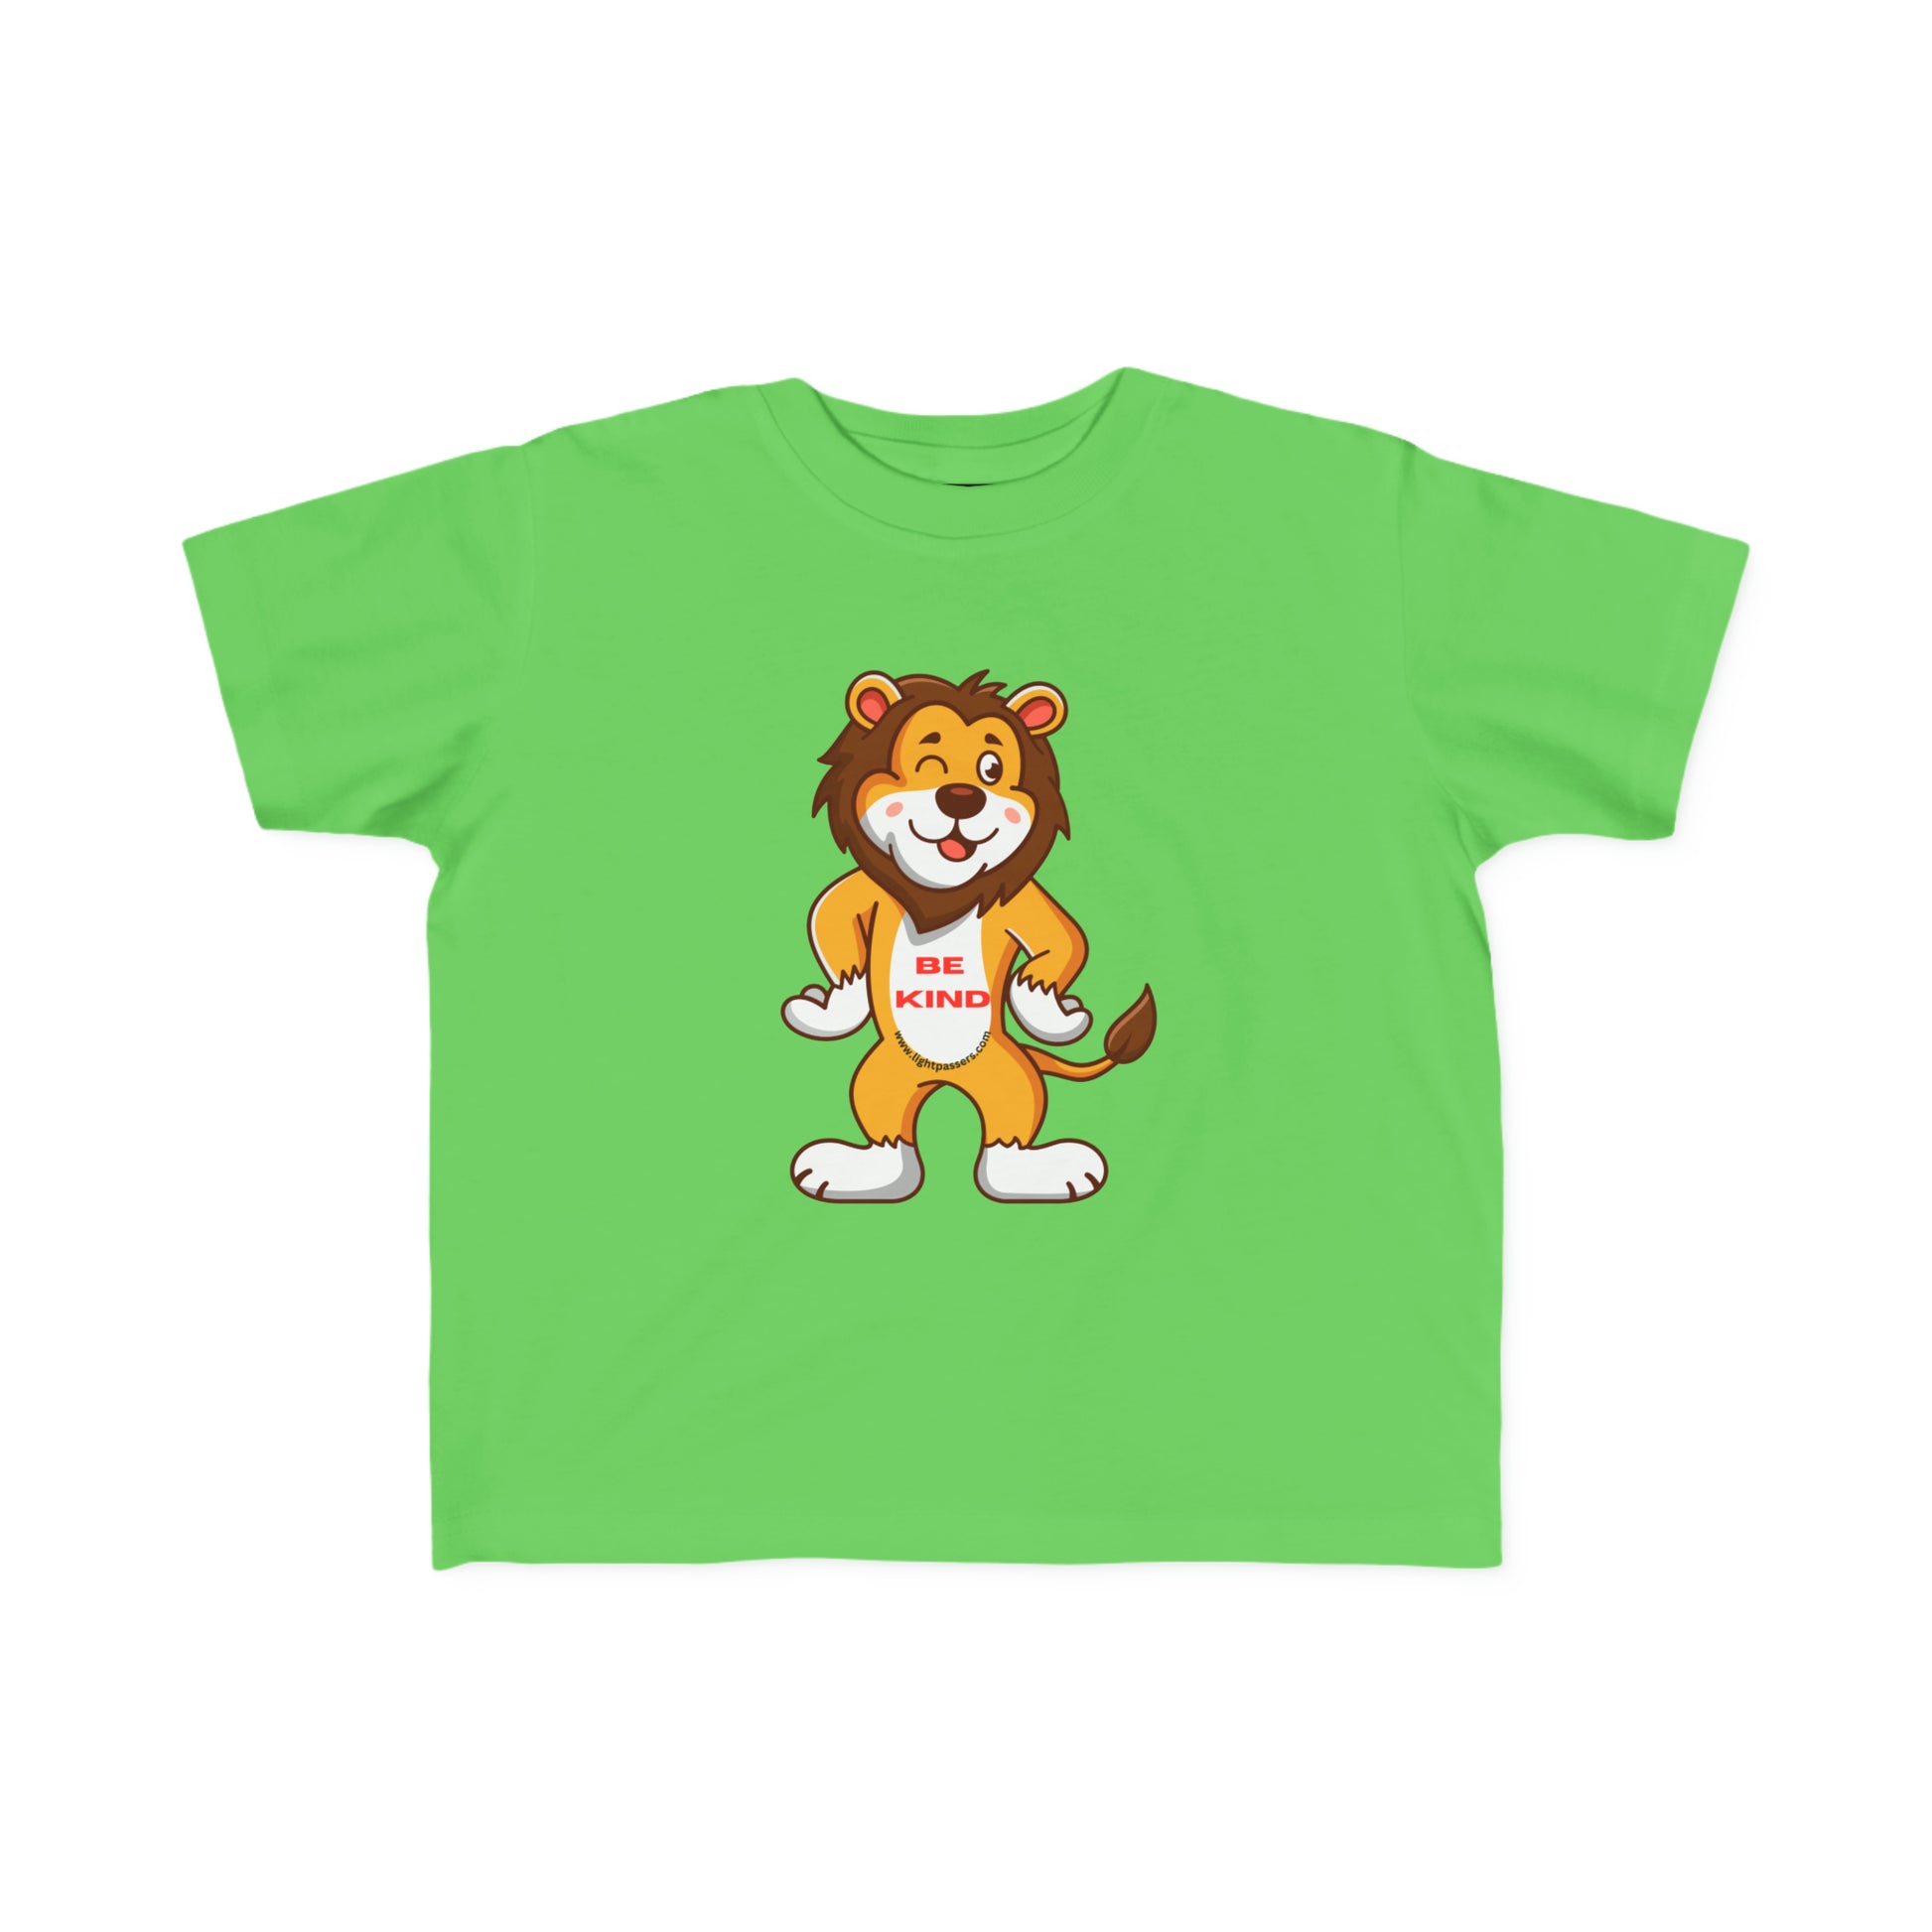 A toddler's tee featuring a cartoon lion, soft 100% combed cotton, durable print, tear-away label, and a classic fit. Ideal for sensitive skin, first adventures, and true-to-size fit.